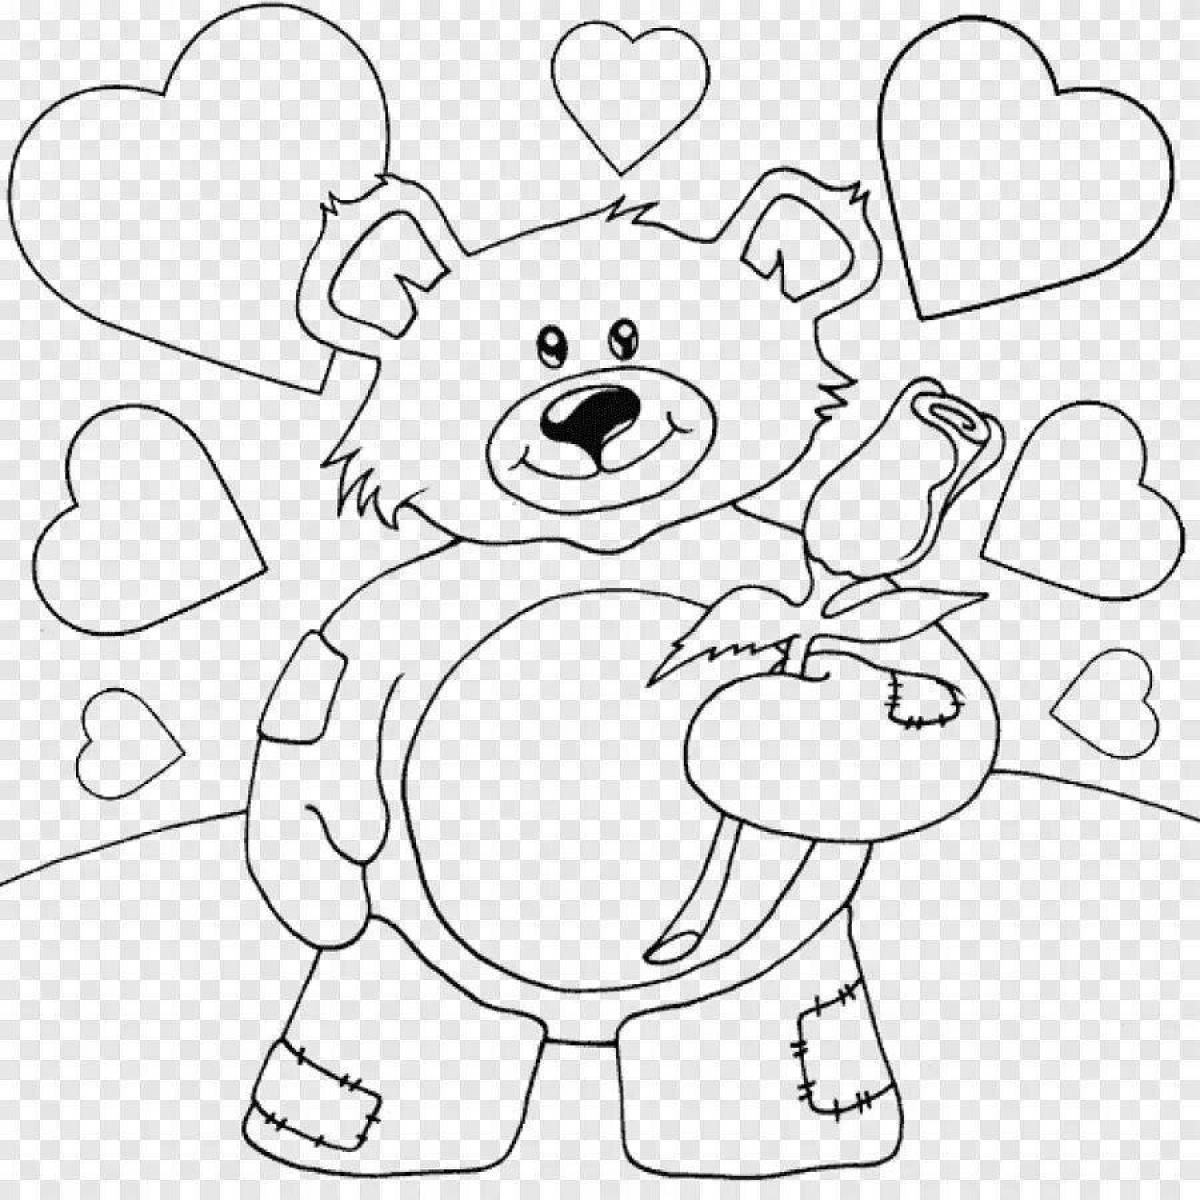 Teddy bear with a heart coloring